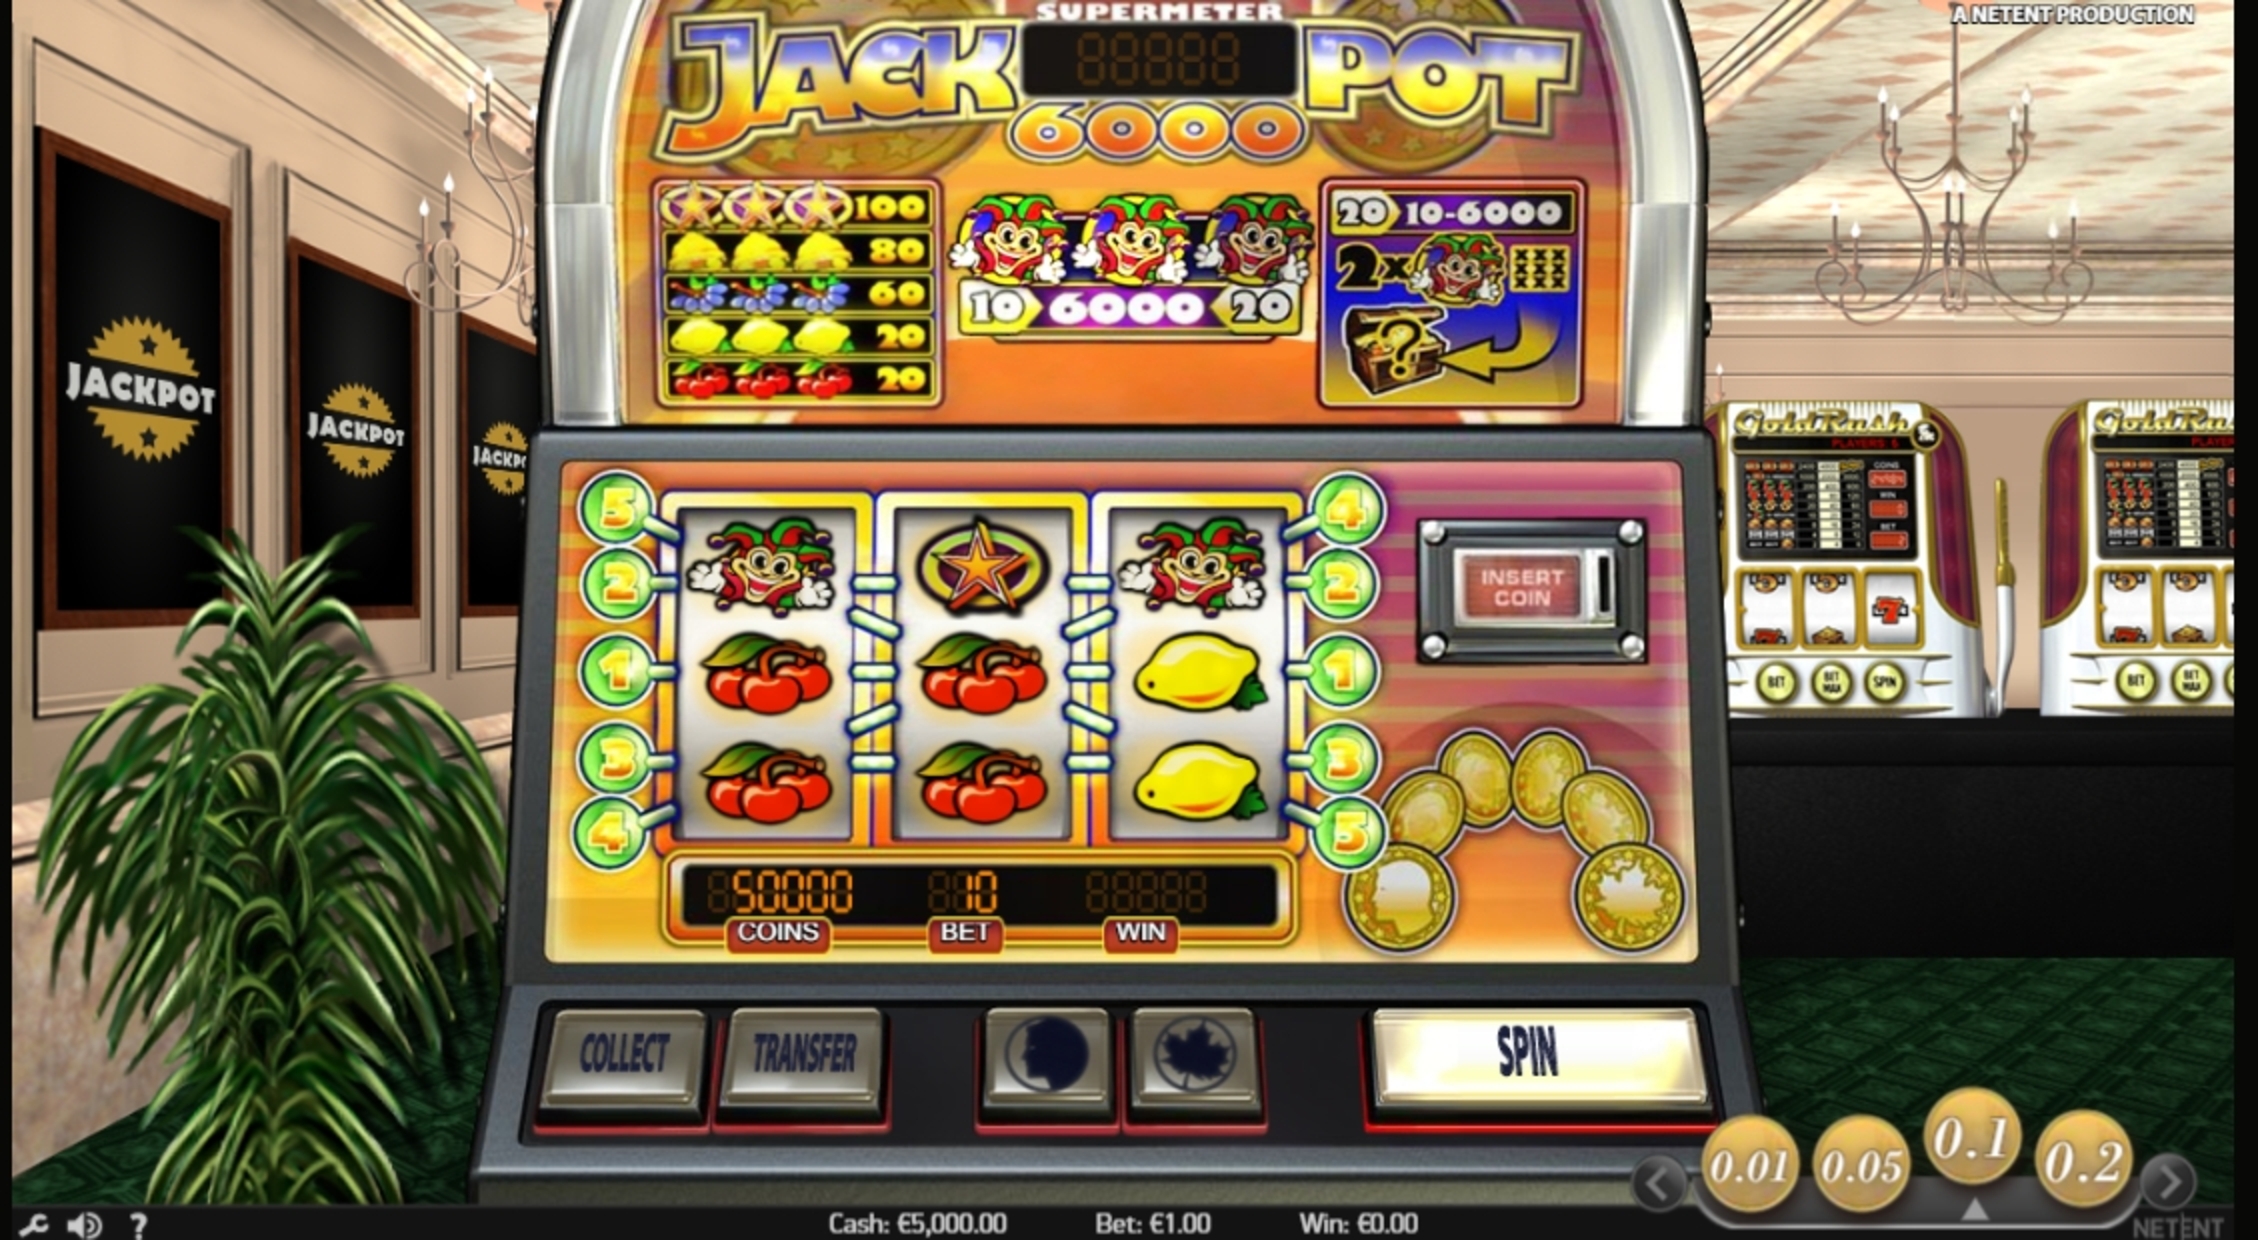 Reels in Jackpot 6000 Slot Game by NetEnt